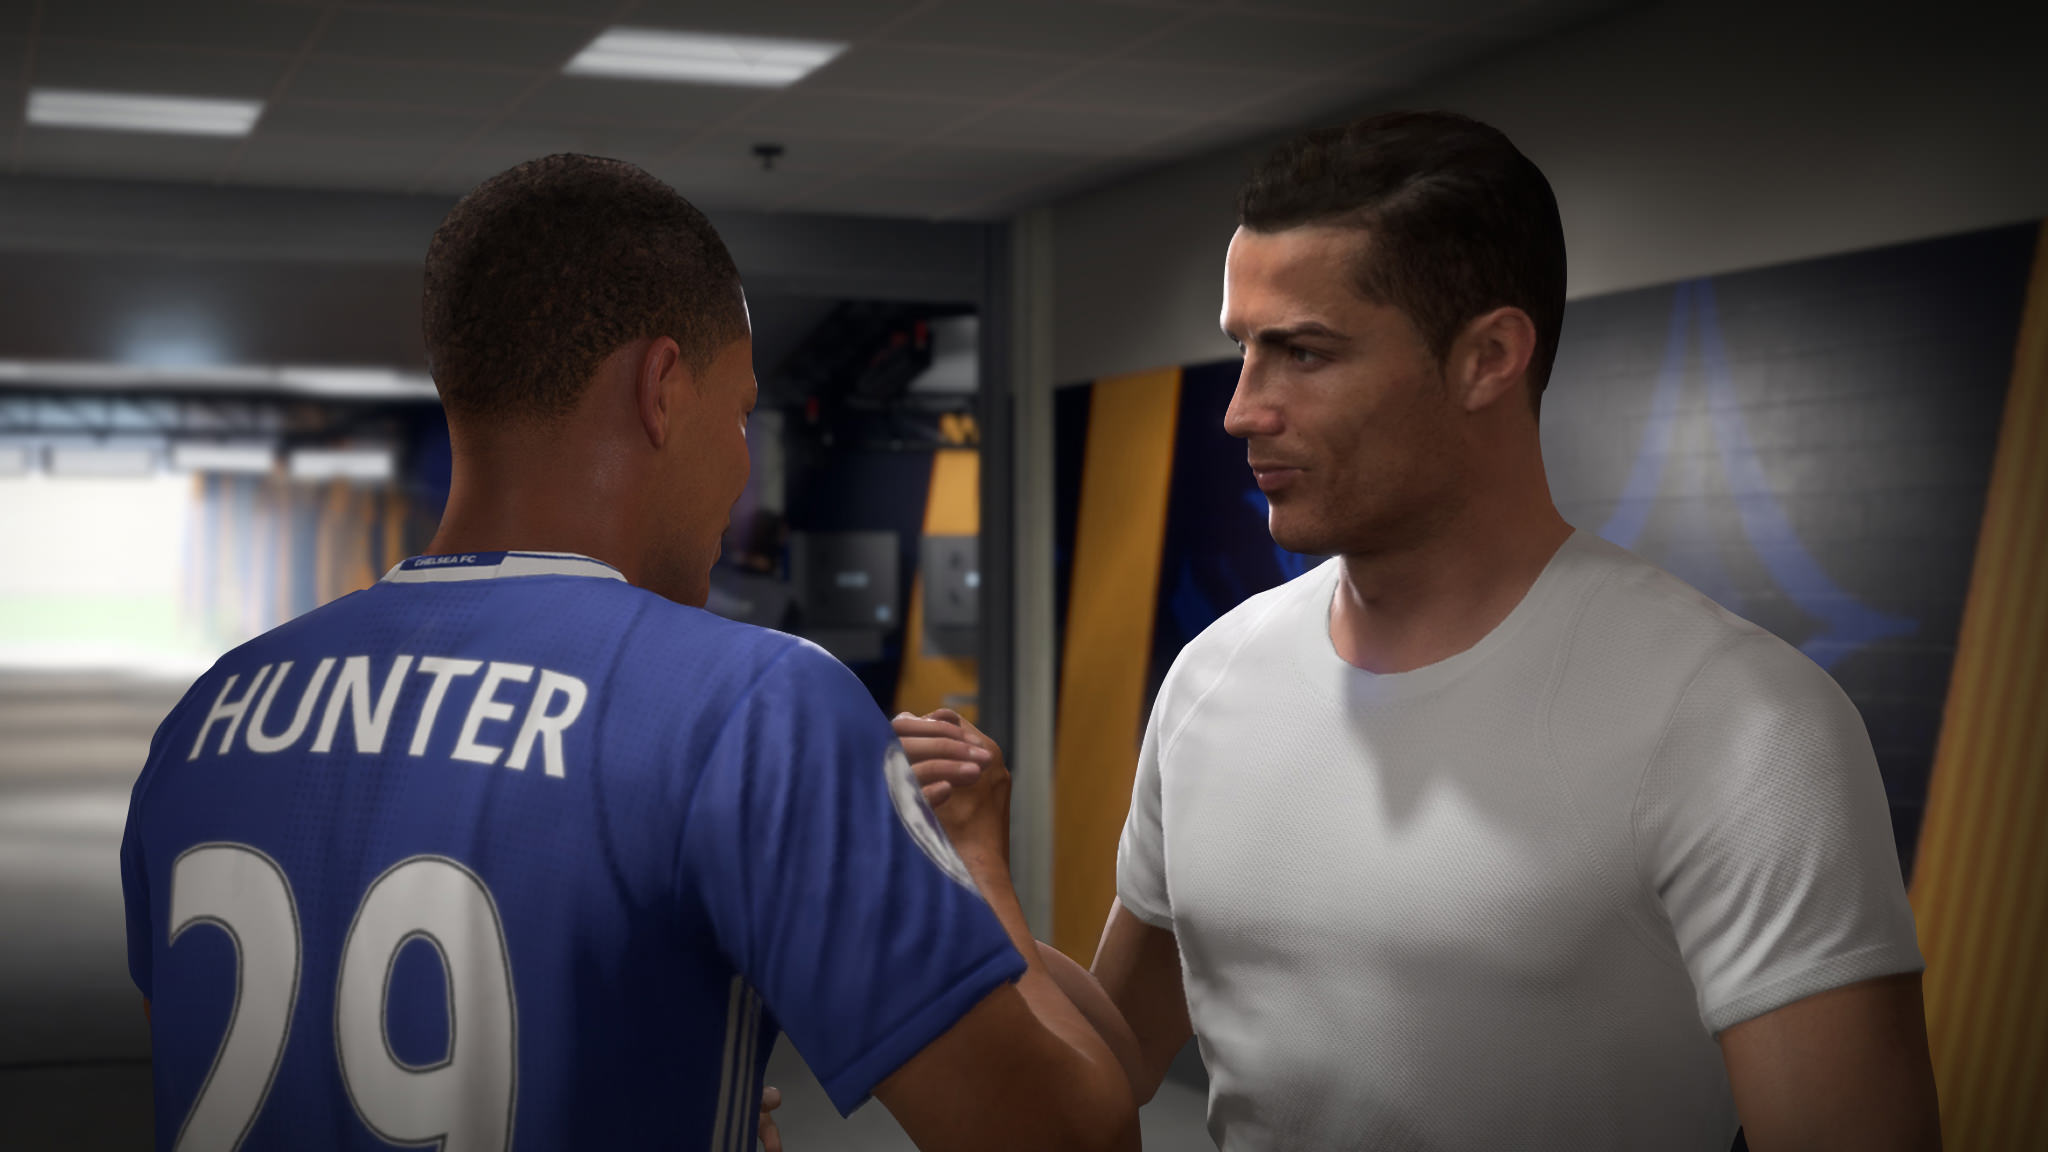 FIFA 18 brings back The Journey with Season 2